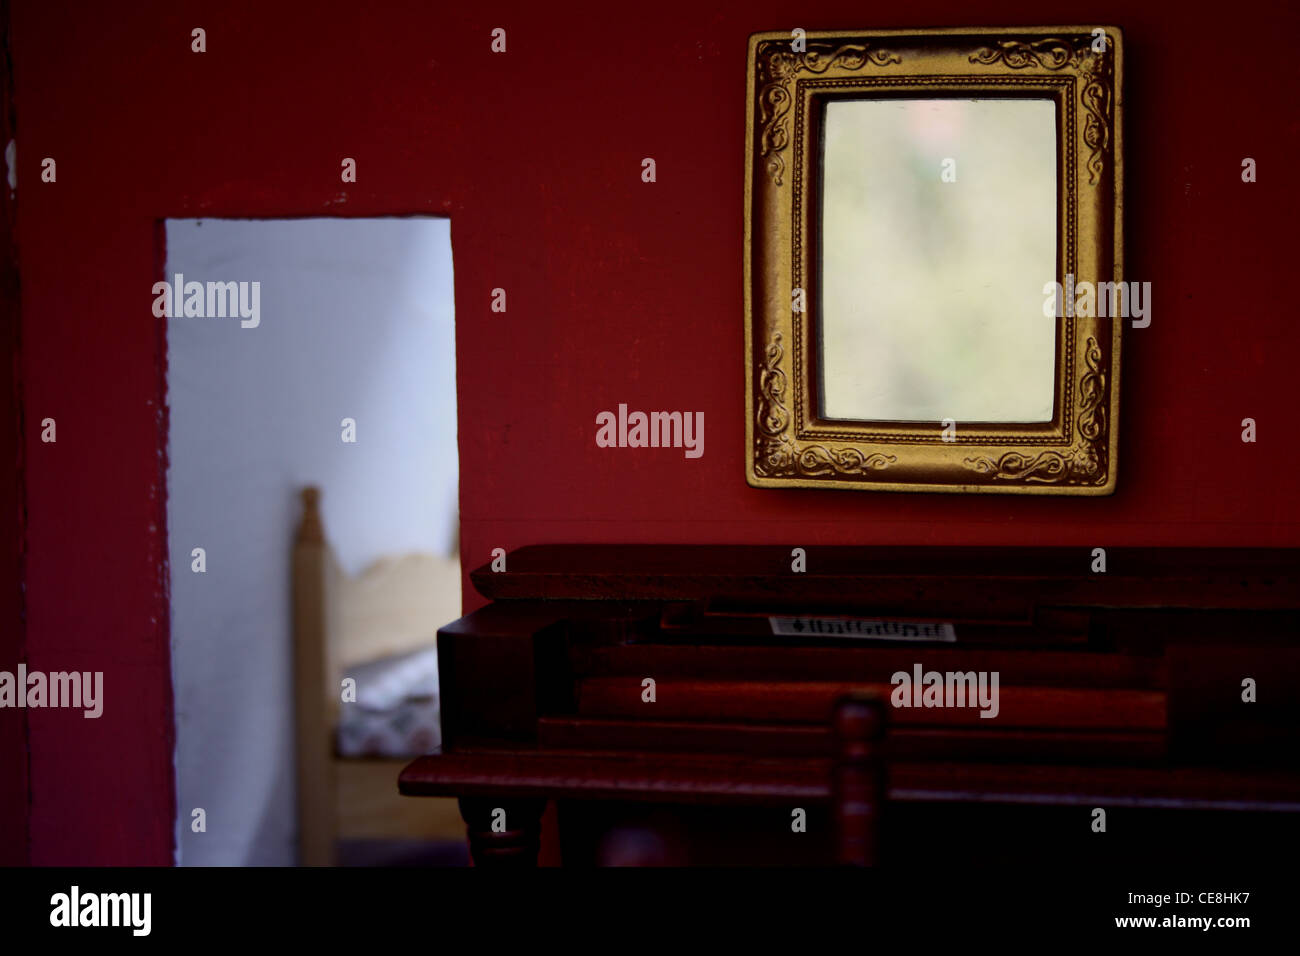 Dolls house mirror and piano, with bedroom in the background doorway. Stock Photo